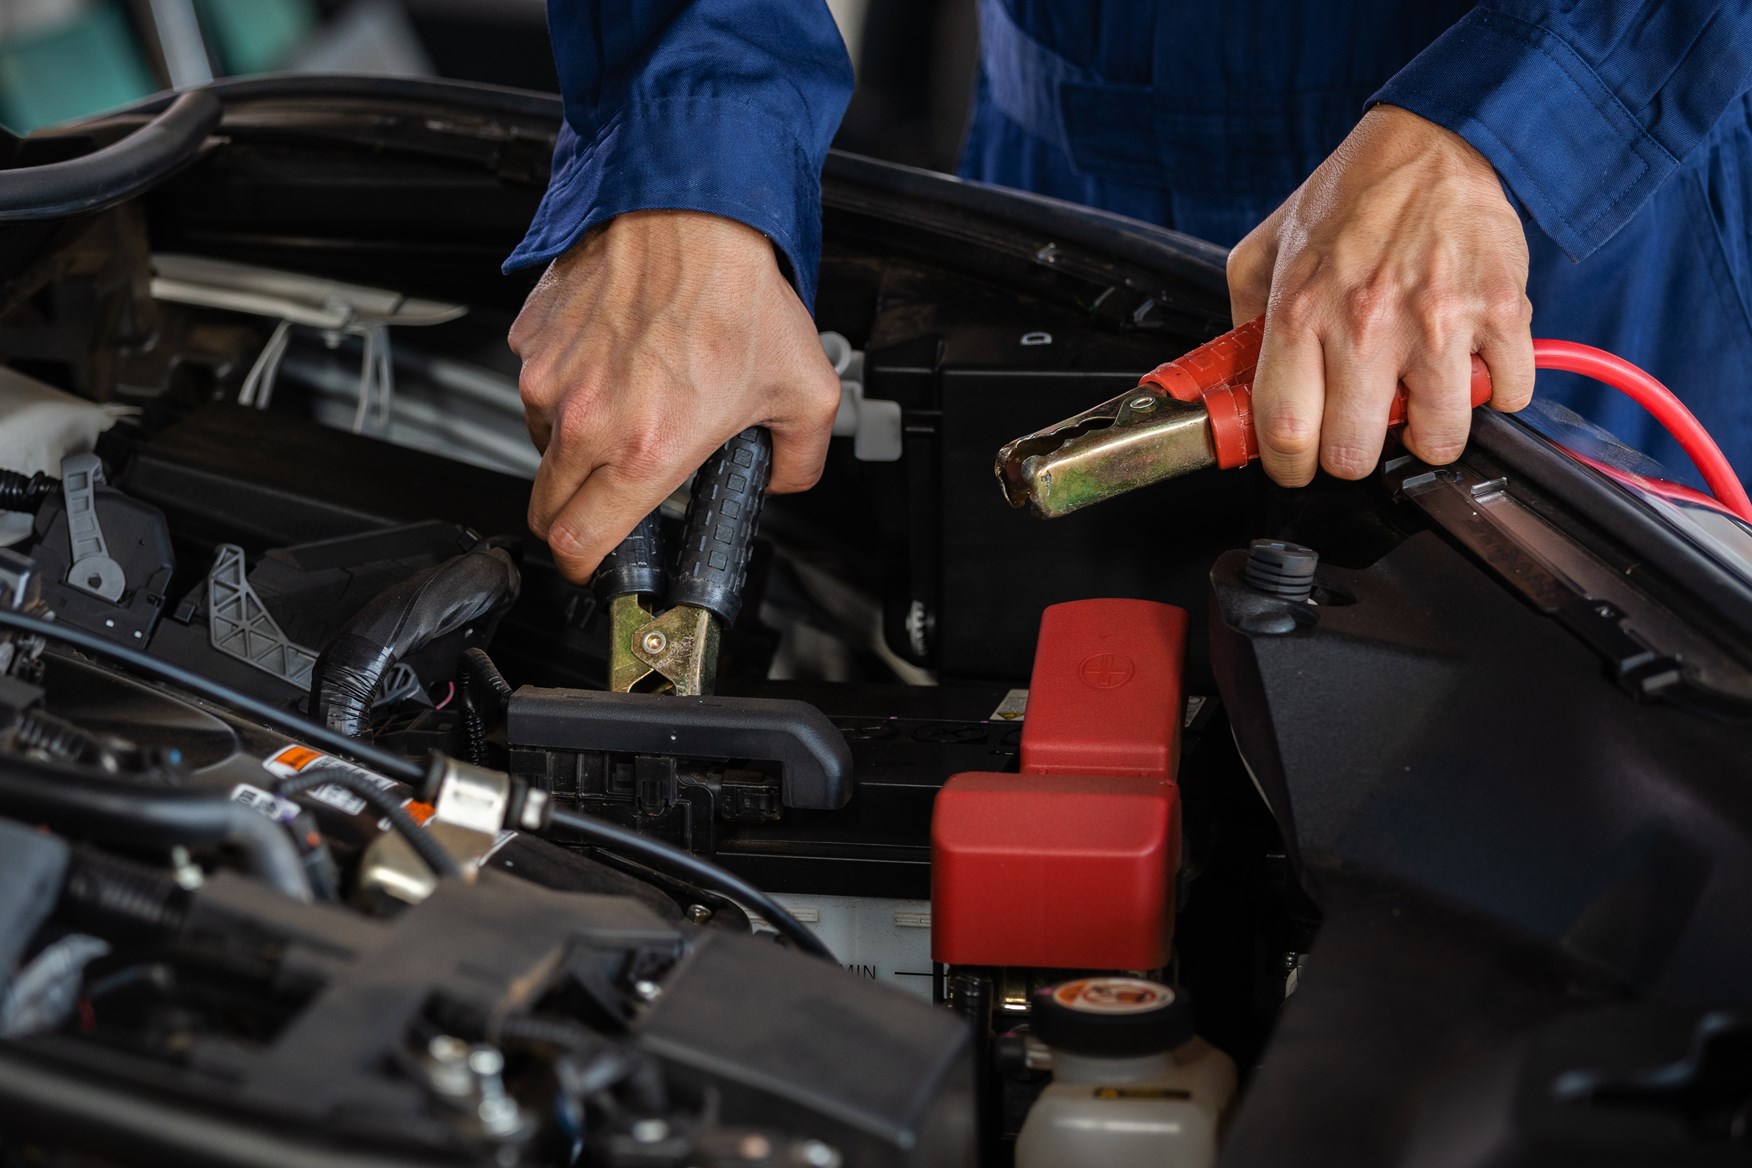 How to jump-start a car. Follow these steps to keep on motoring